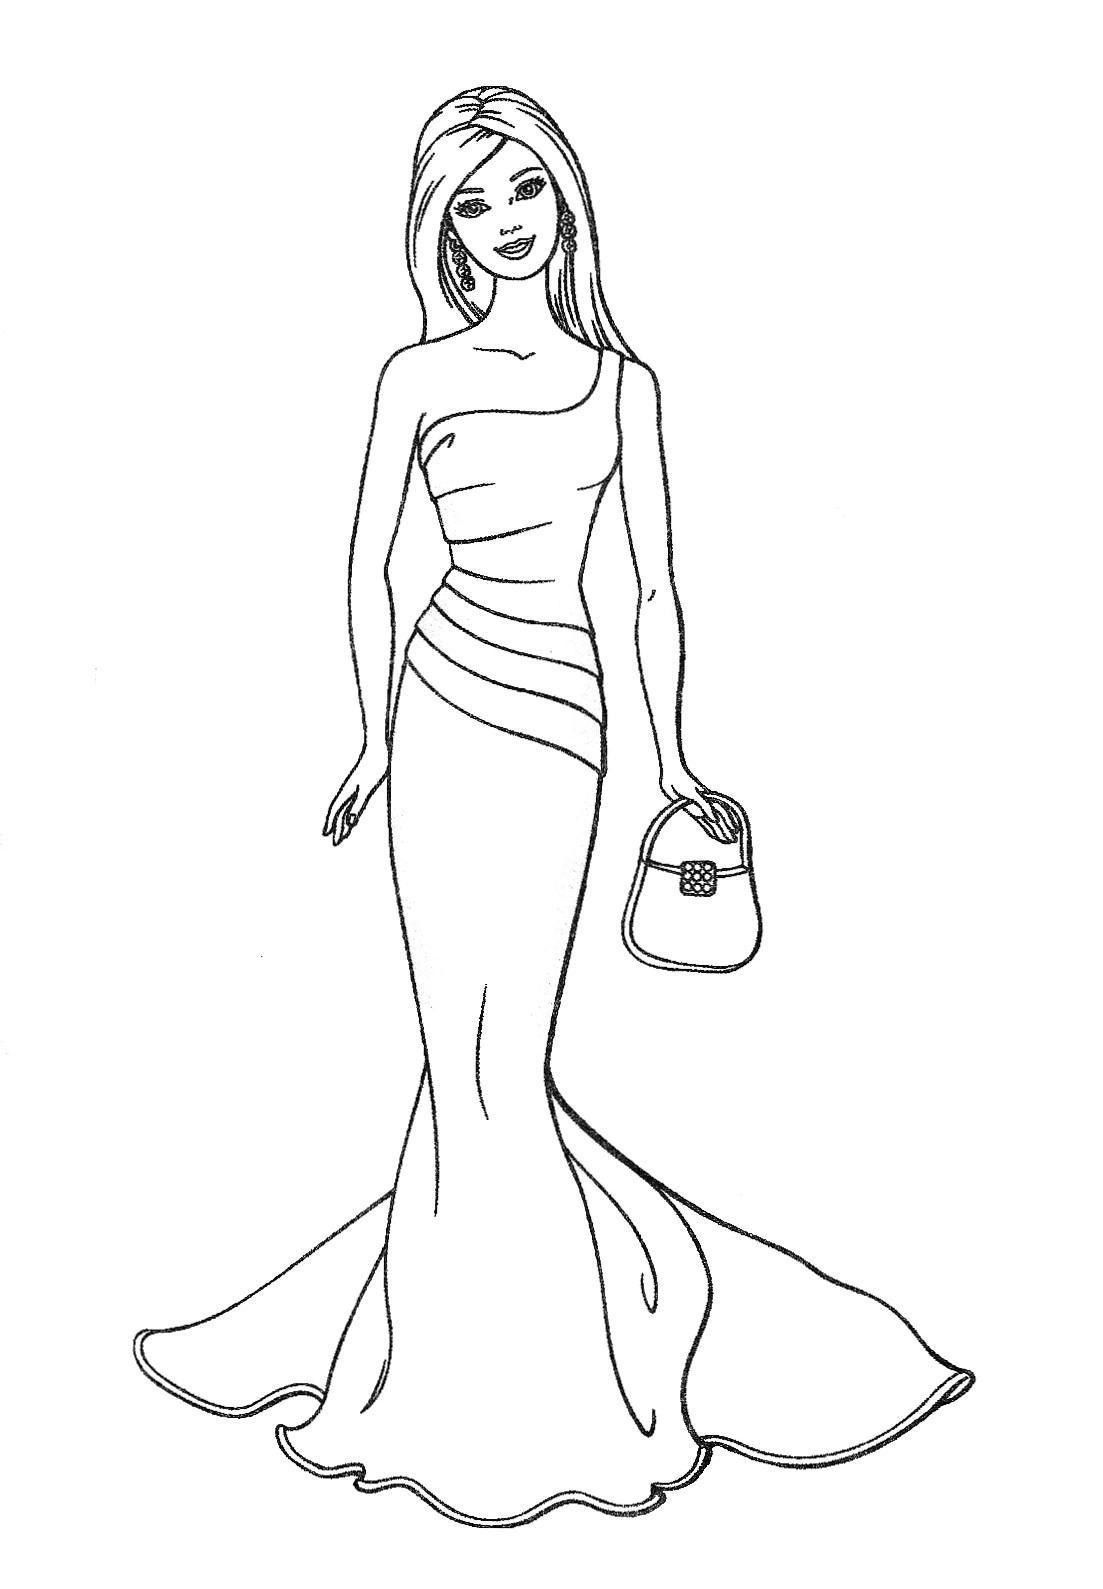 Barbie Fashion Coloring Pictures - High Quality Coloring Pages